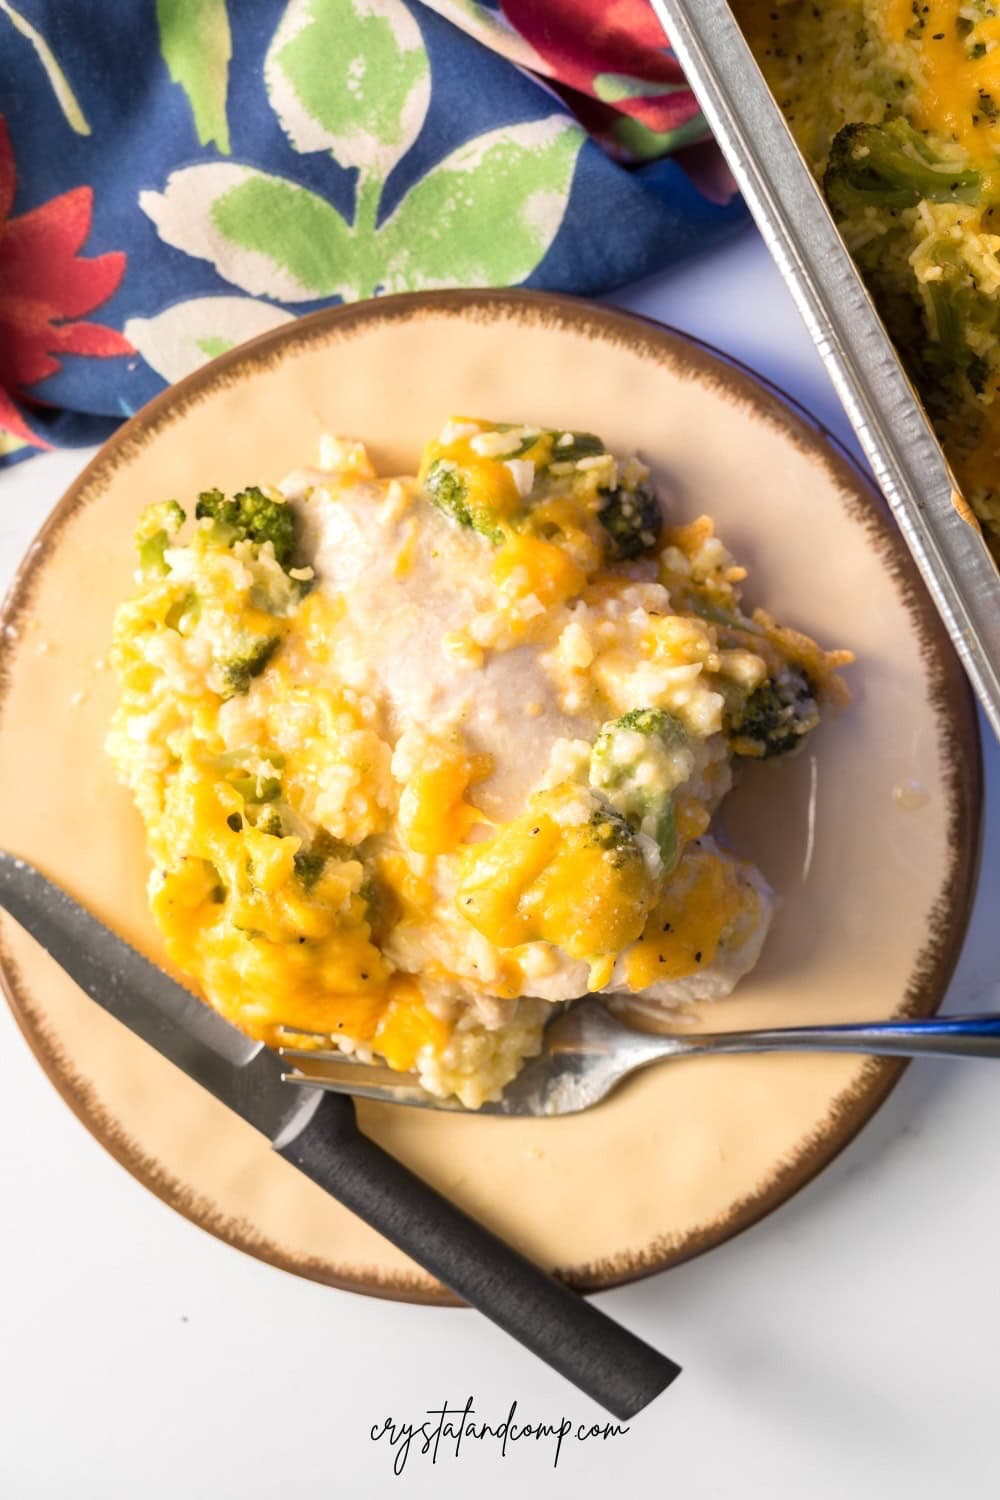 A plate of broccoli and cheese casserole with a fork on a patterned cloth napkin, ideal for busy families. The casserole is creamy with melted cheese on top, served on a